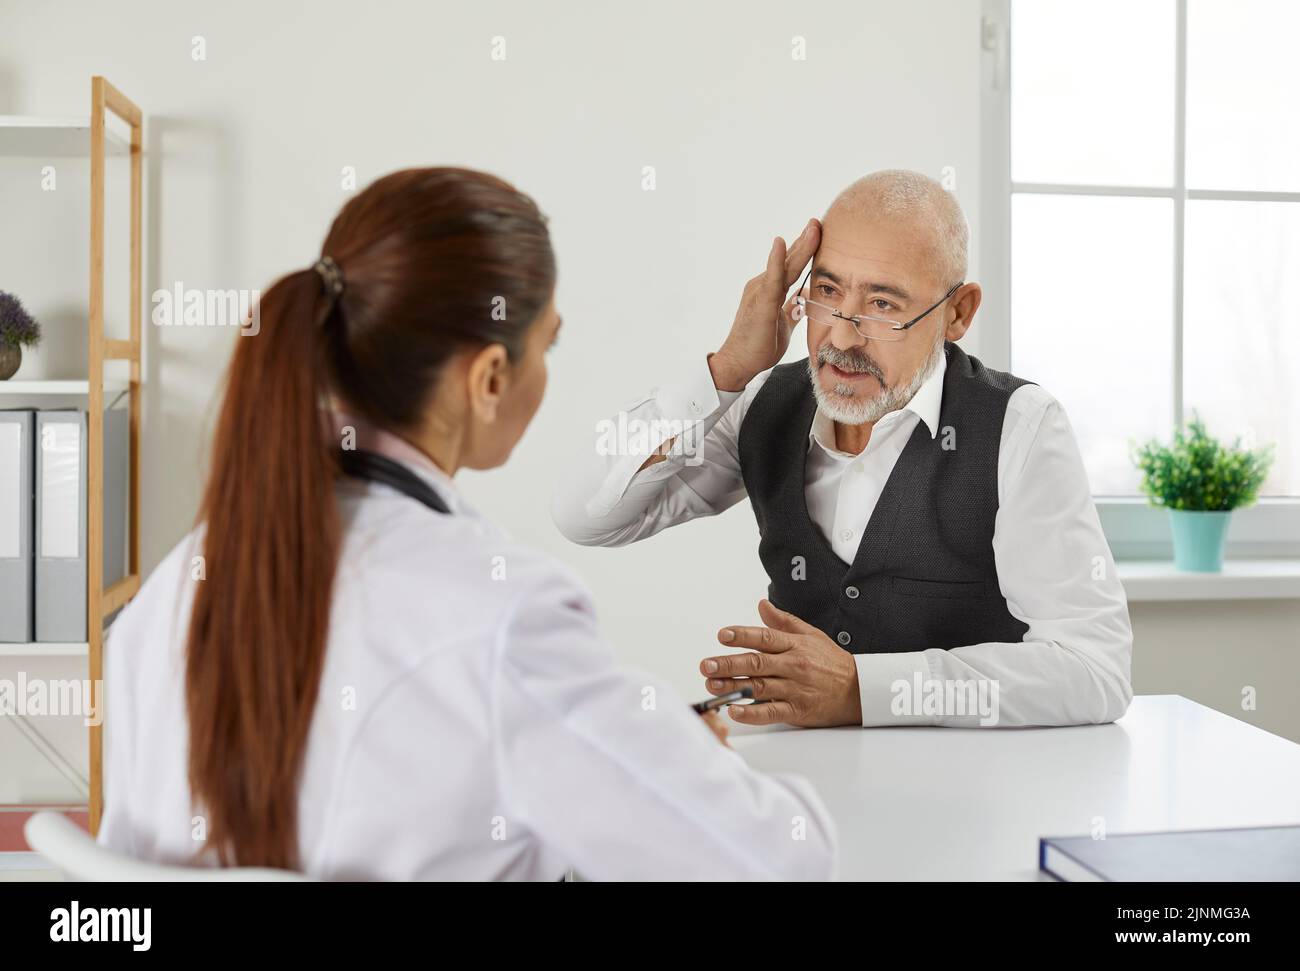 Older man during visit or consultation at clinic tells doctor about his severe headaches. Stock Photo